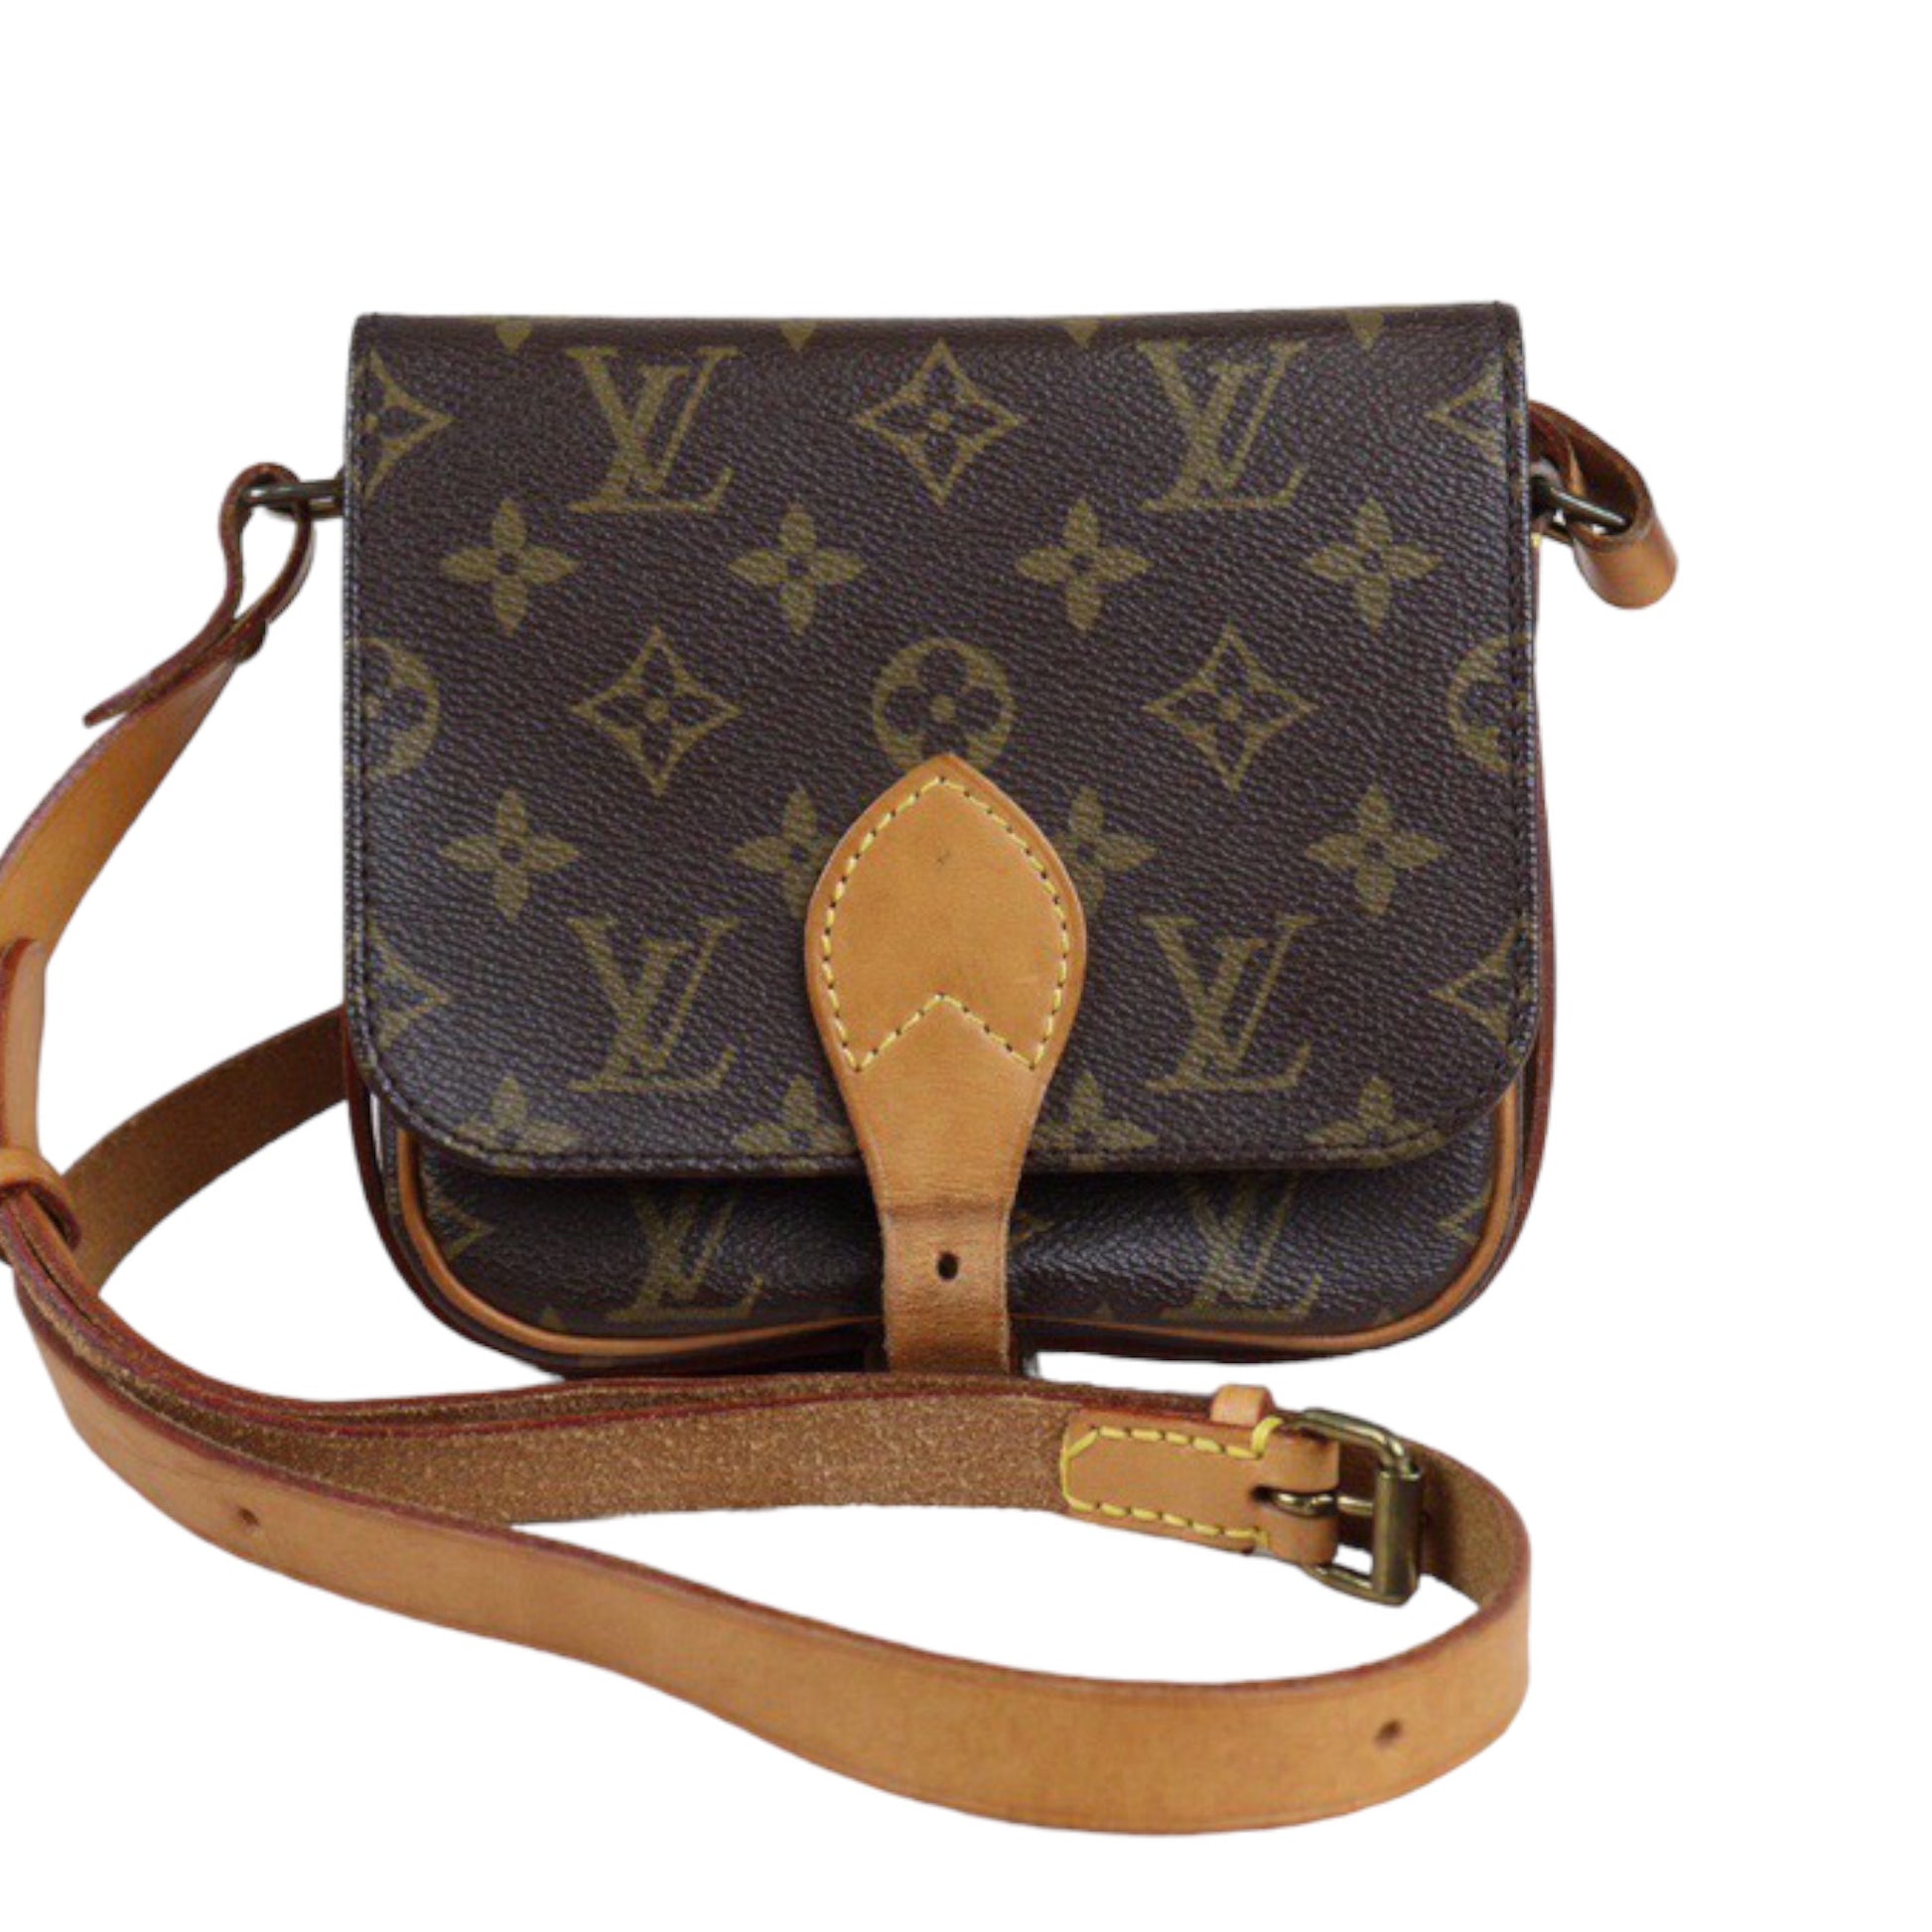 MY NEW VINTAGE LOUIS VUITTON  Should you buy Brand new or Vintage